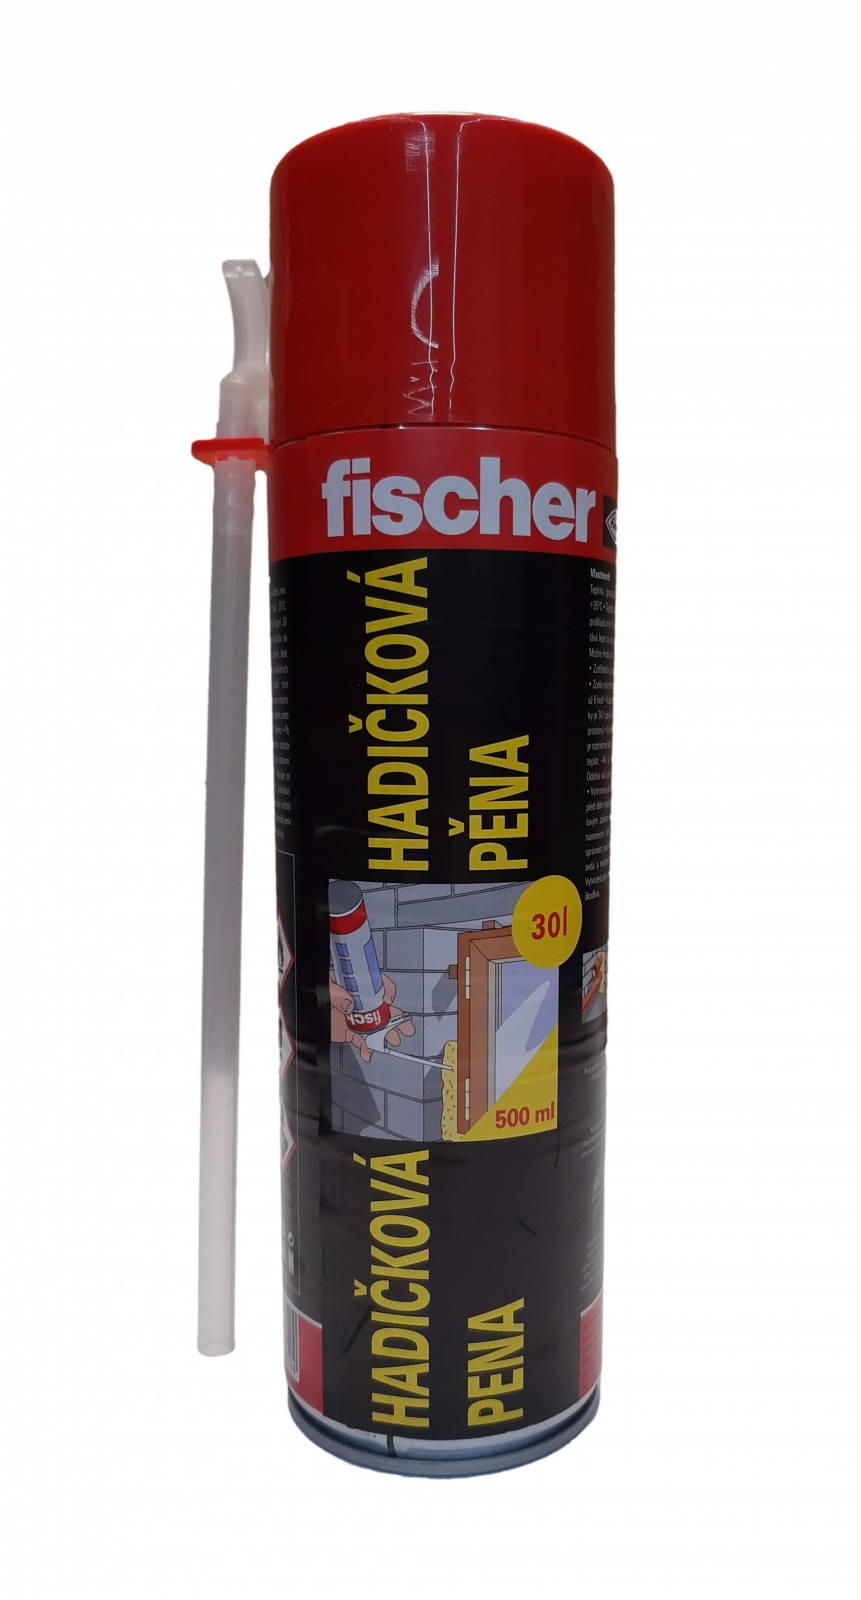 Tubular Mounting Foam PU 500ml / 30L Fischer with Valve OTHERS